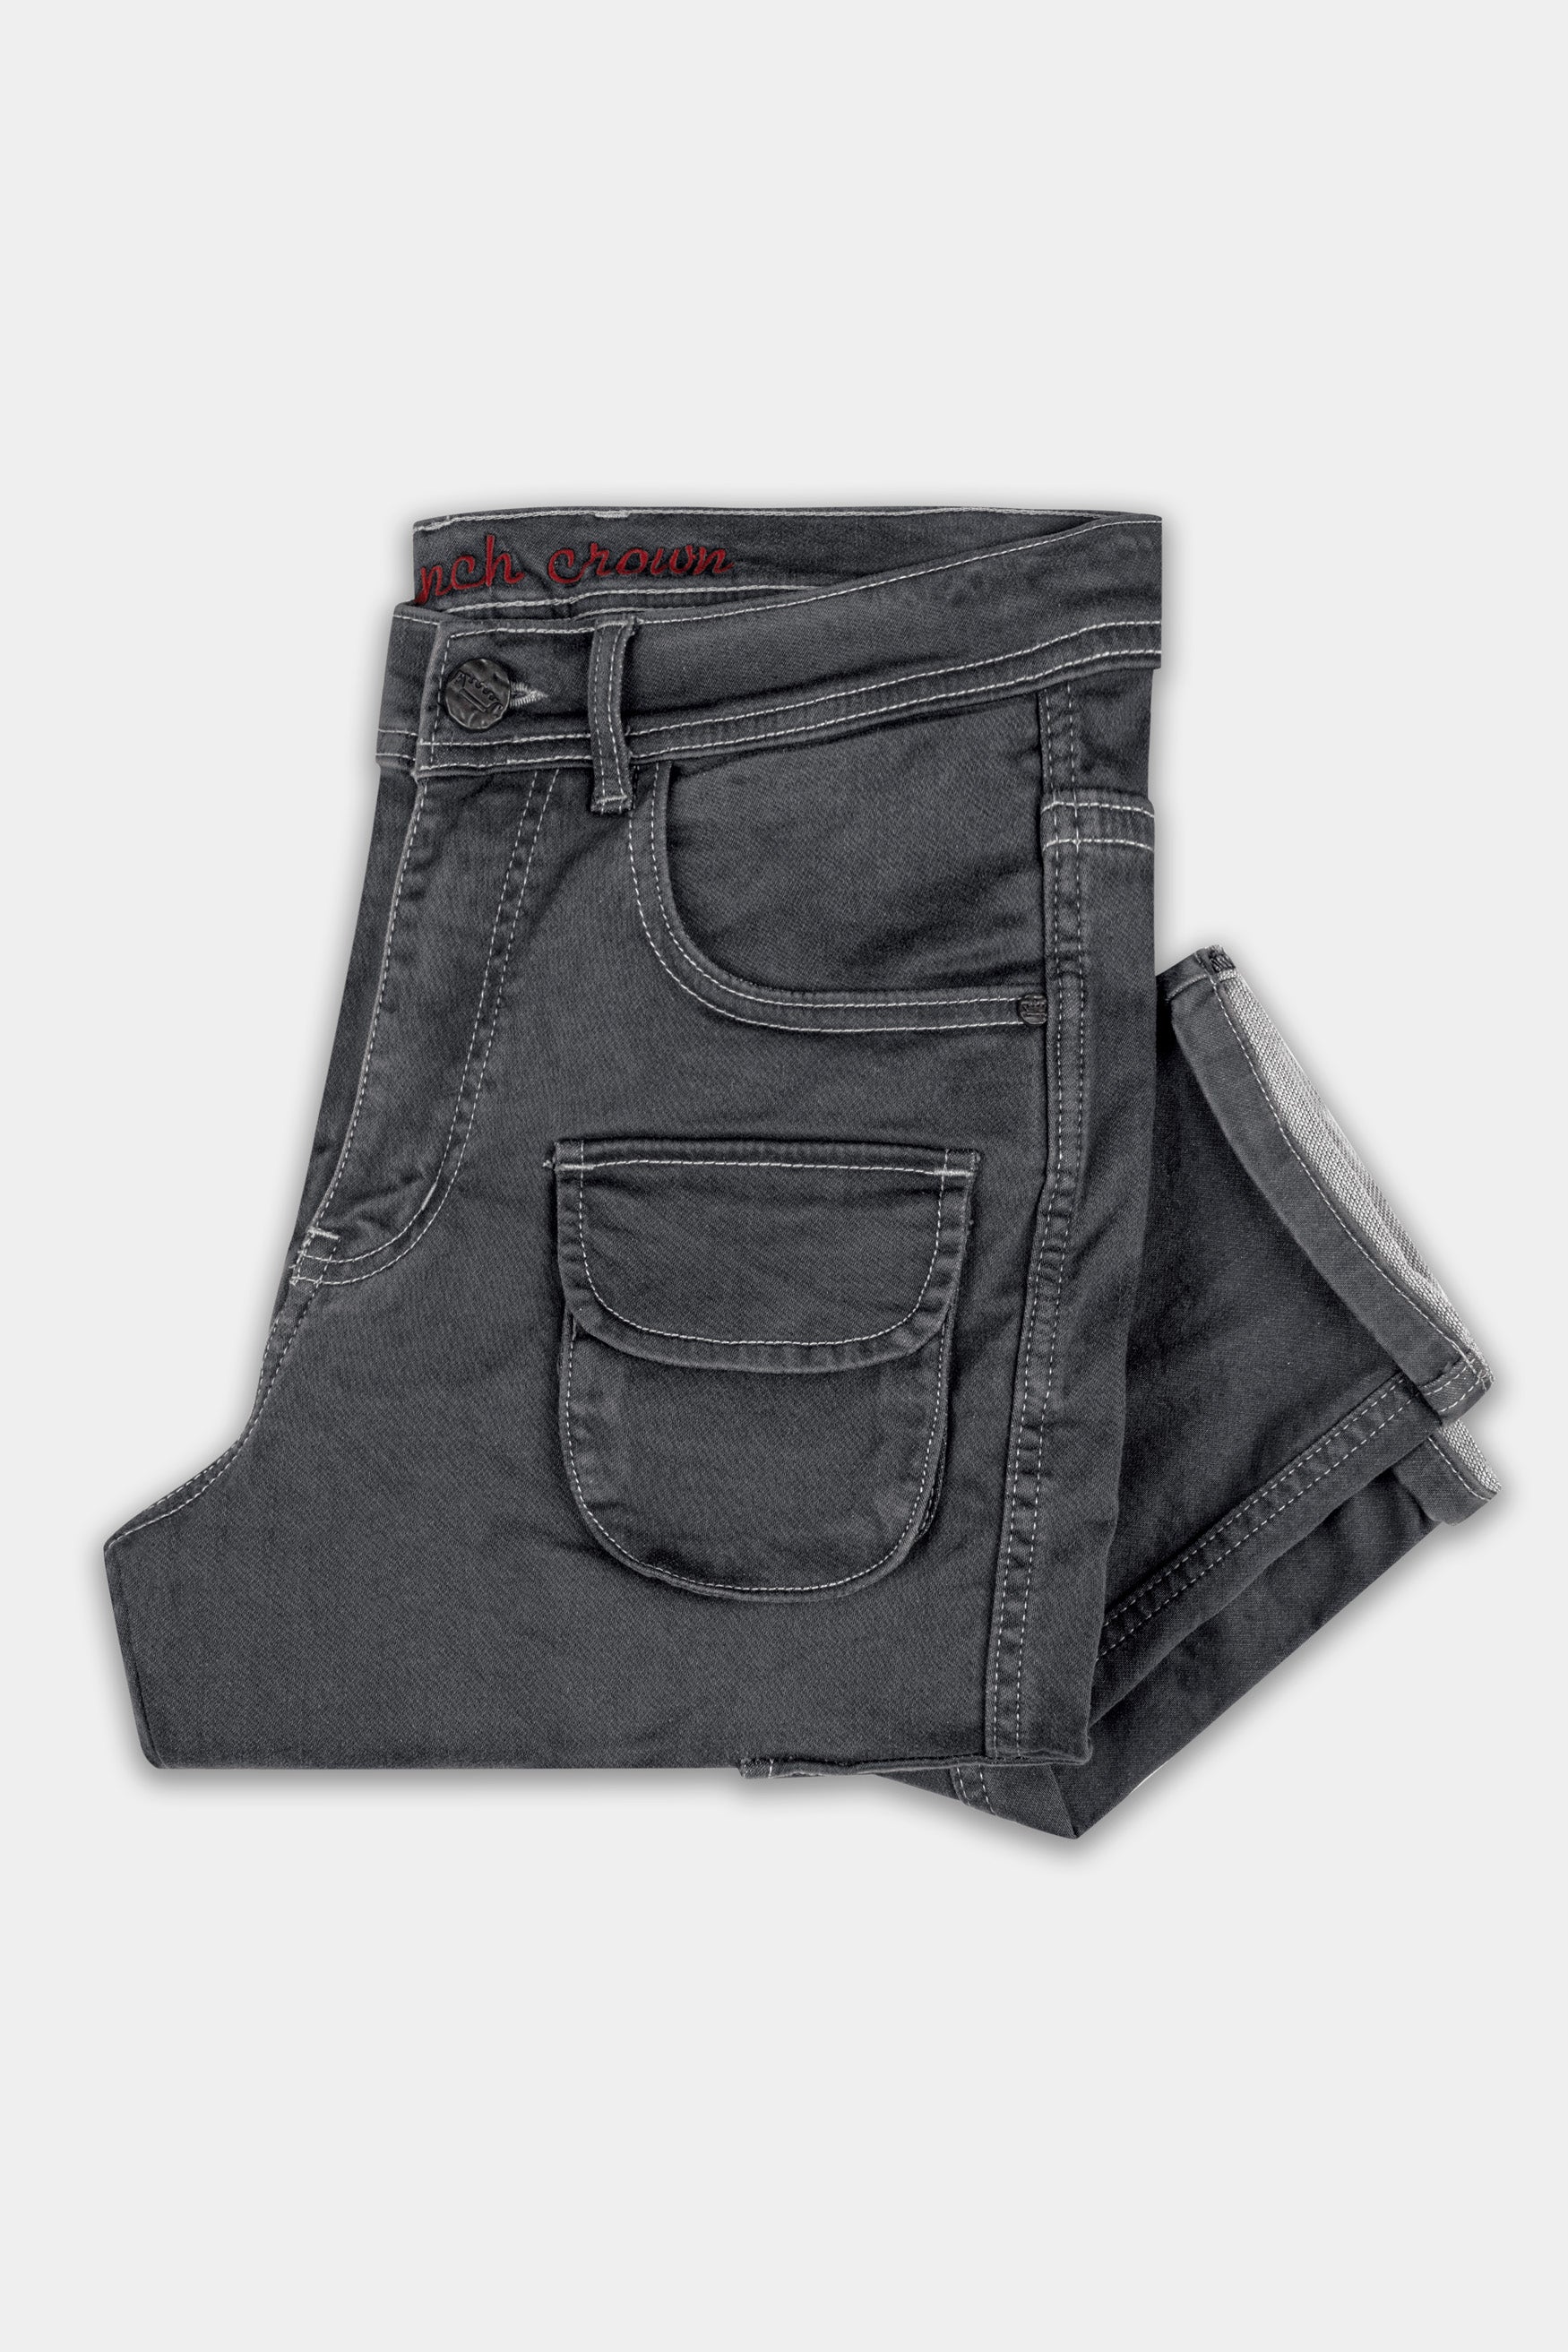 Charcoal Gray Rinse washed Cargo Denim